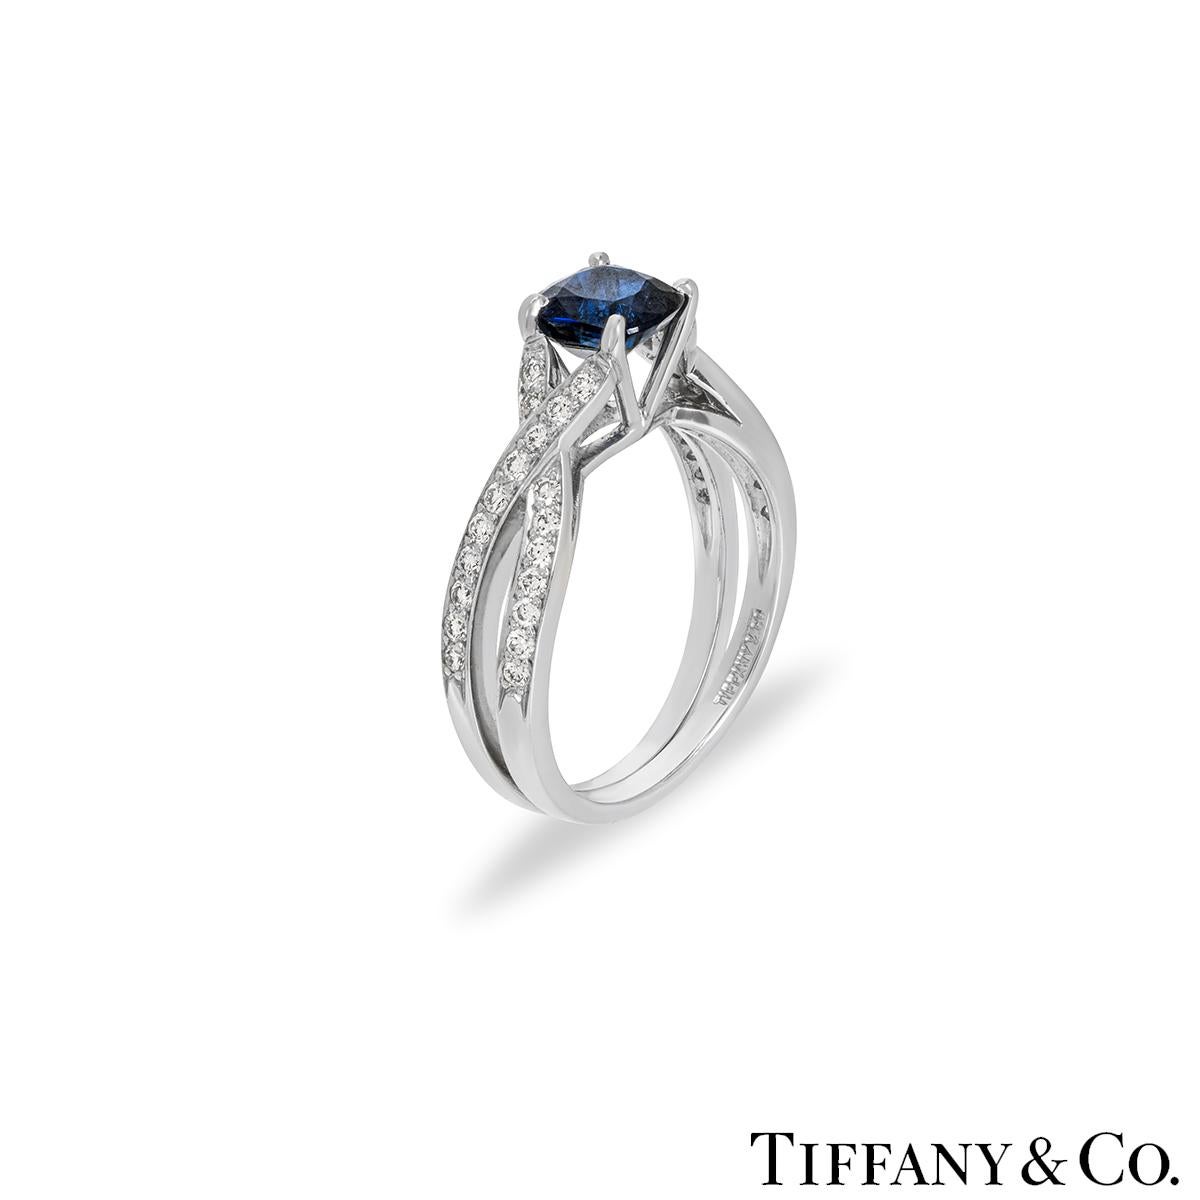 An elegant platinum sapphire and diamond dress ring by Tiffany & Co. The ring features a cushion shaped sapphire with an approximate weight of 0.90ct, displaying a deep blue hue. Complementing the sapphire are 38 round brilliant cut diamonds pave